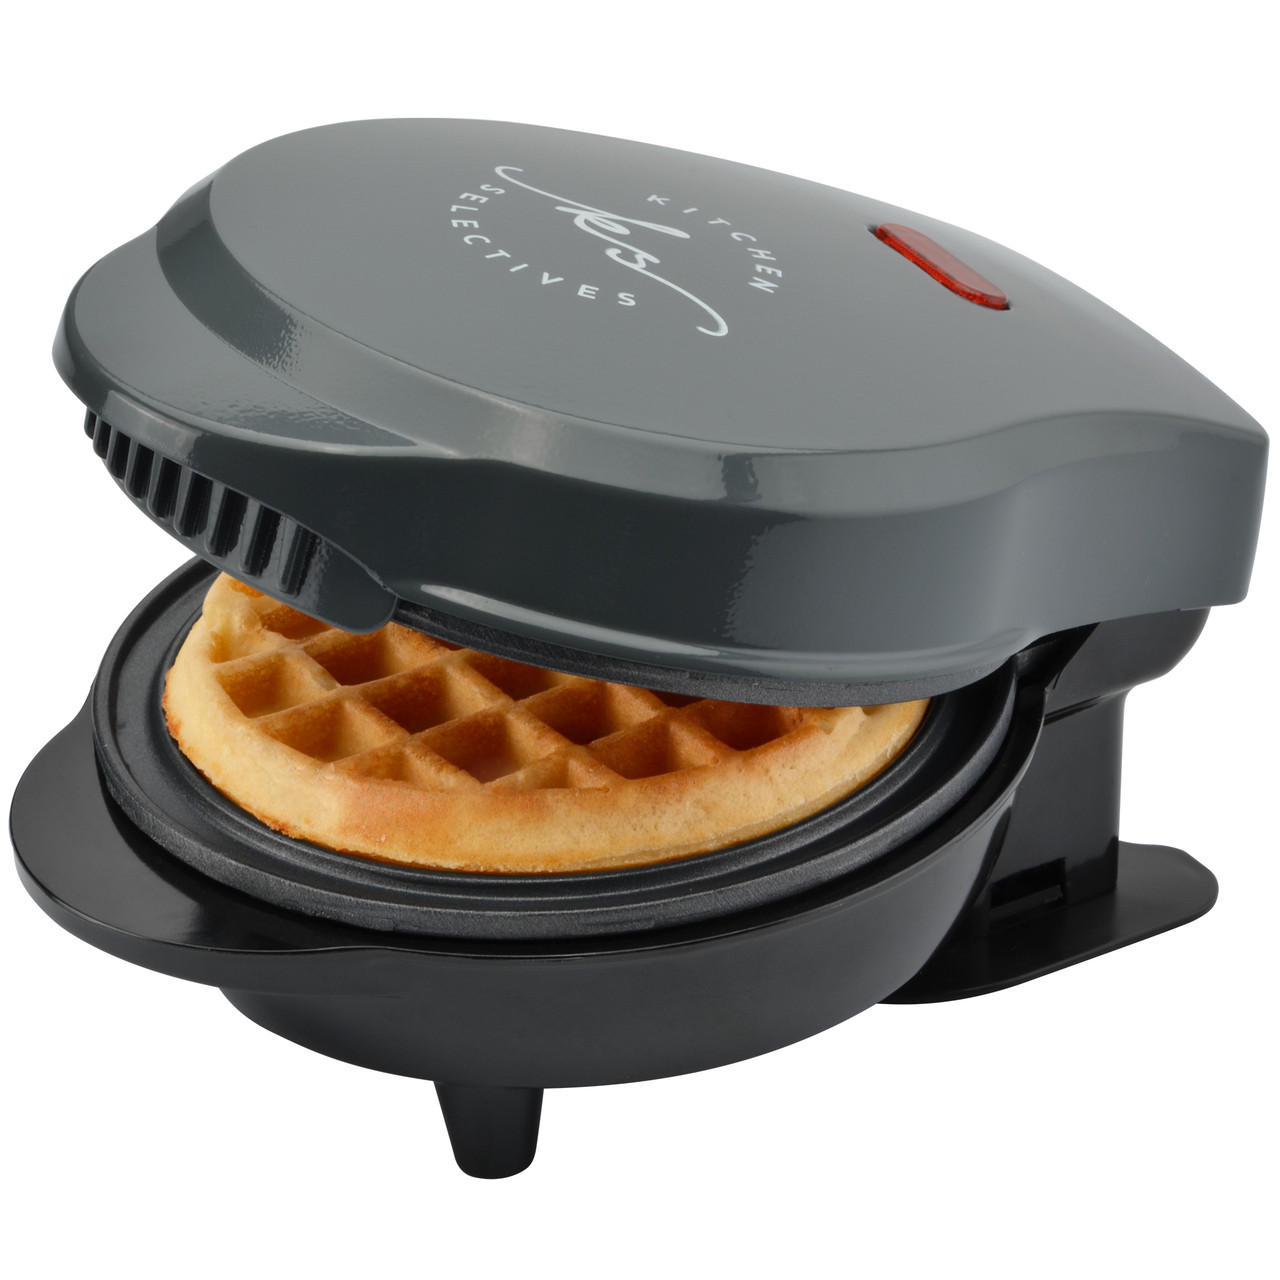 Cold Stone Creamery Waffle Maker, Mini Waffle Bowl Maker, Electric,  Nonstick, 4 inch cooking surface